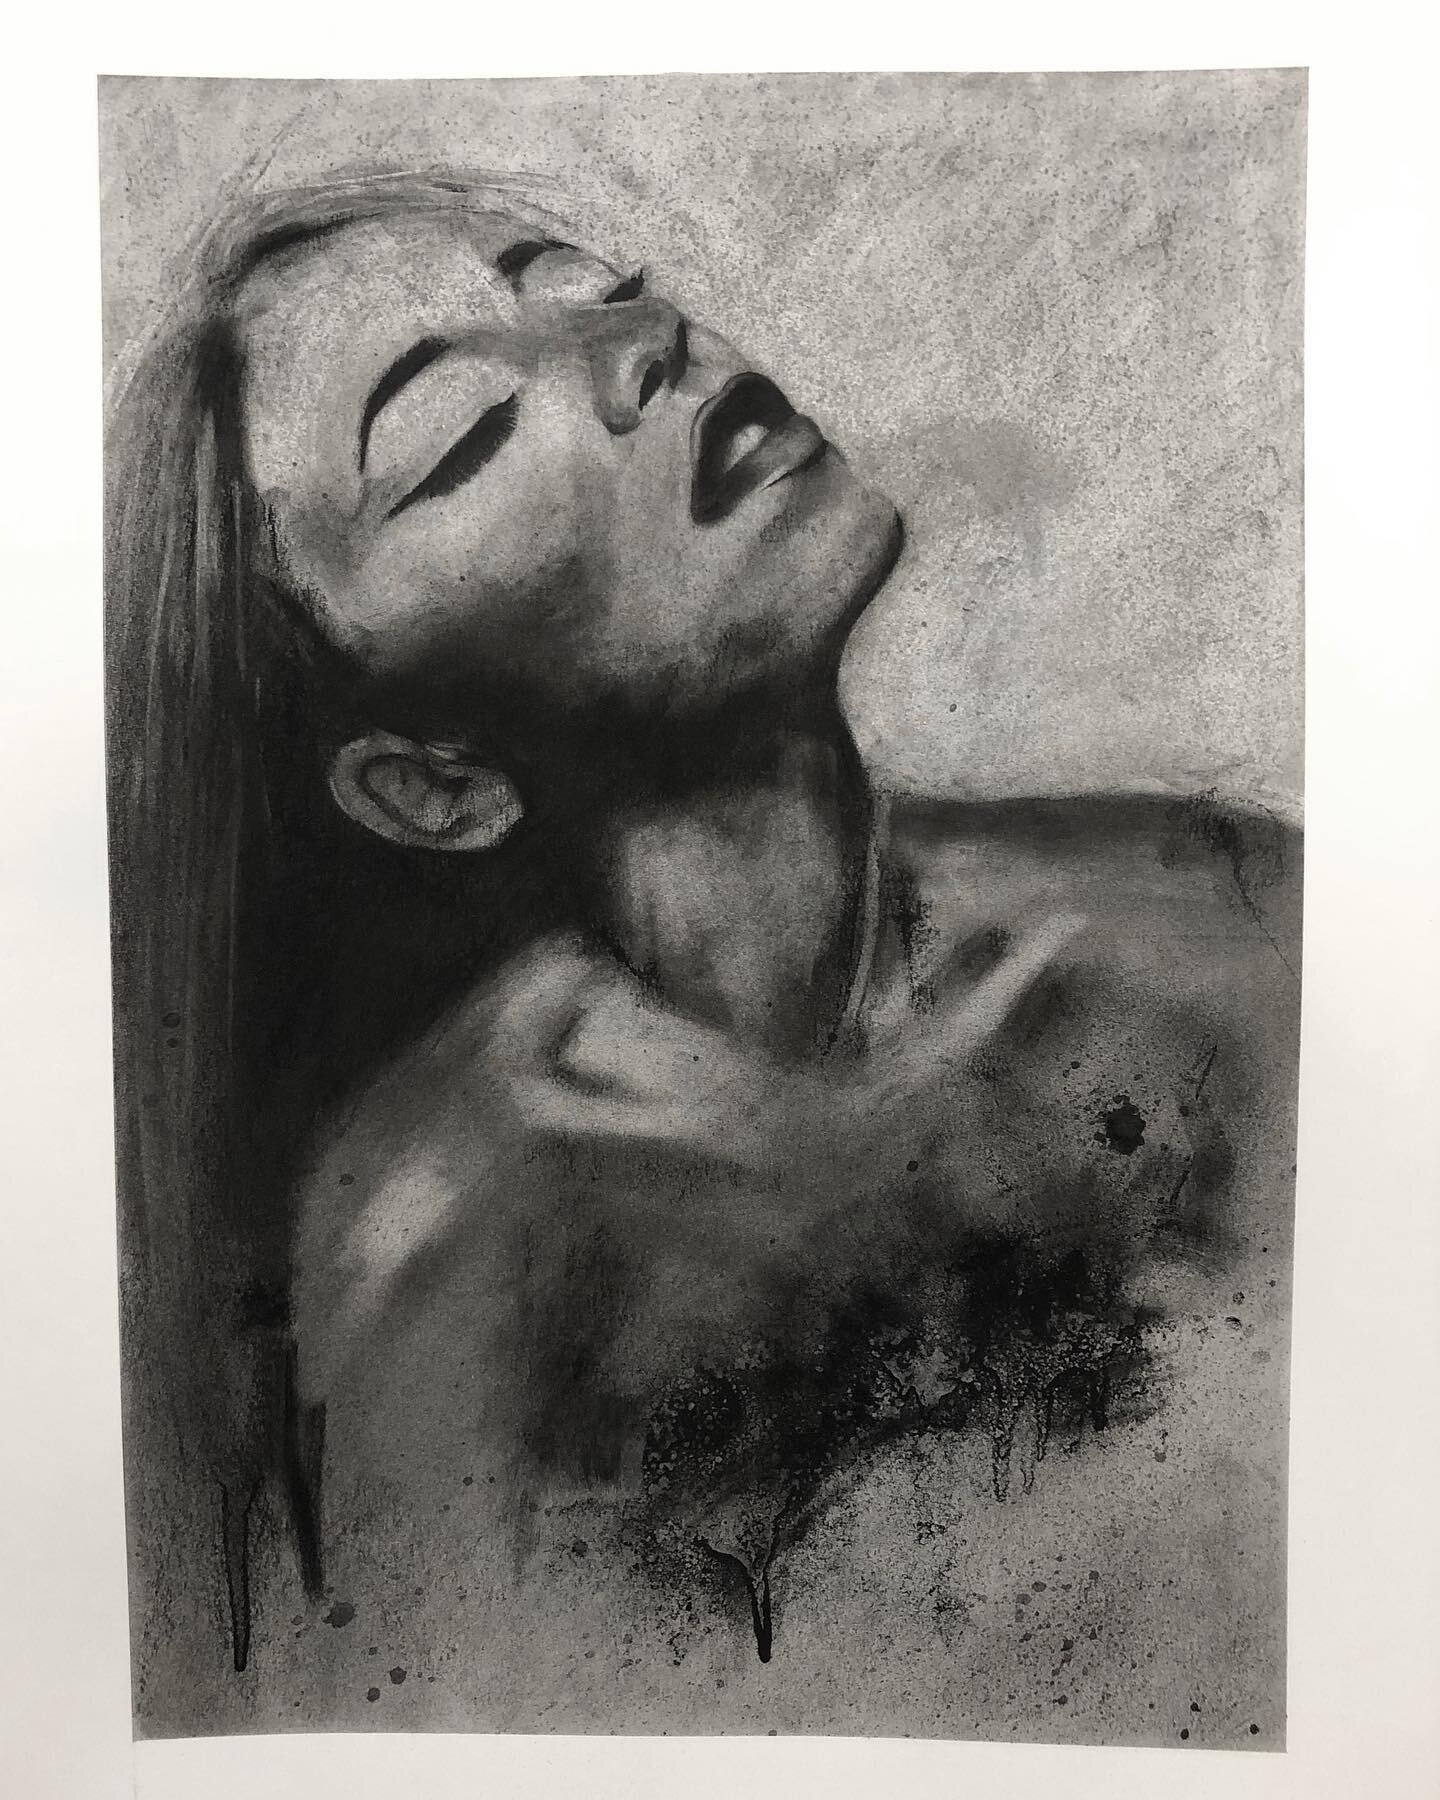 How right they are to adore you. 
.
#art #artwork #artist #charcoal #portrait #charcoaldrawing #portraitdrawing #drawing #charcoalonpaper #sketch #figurativeartist #kc #kcmo #kansascity #kccrossroads #crossroadskc